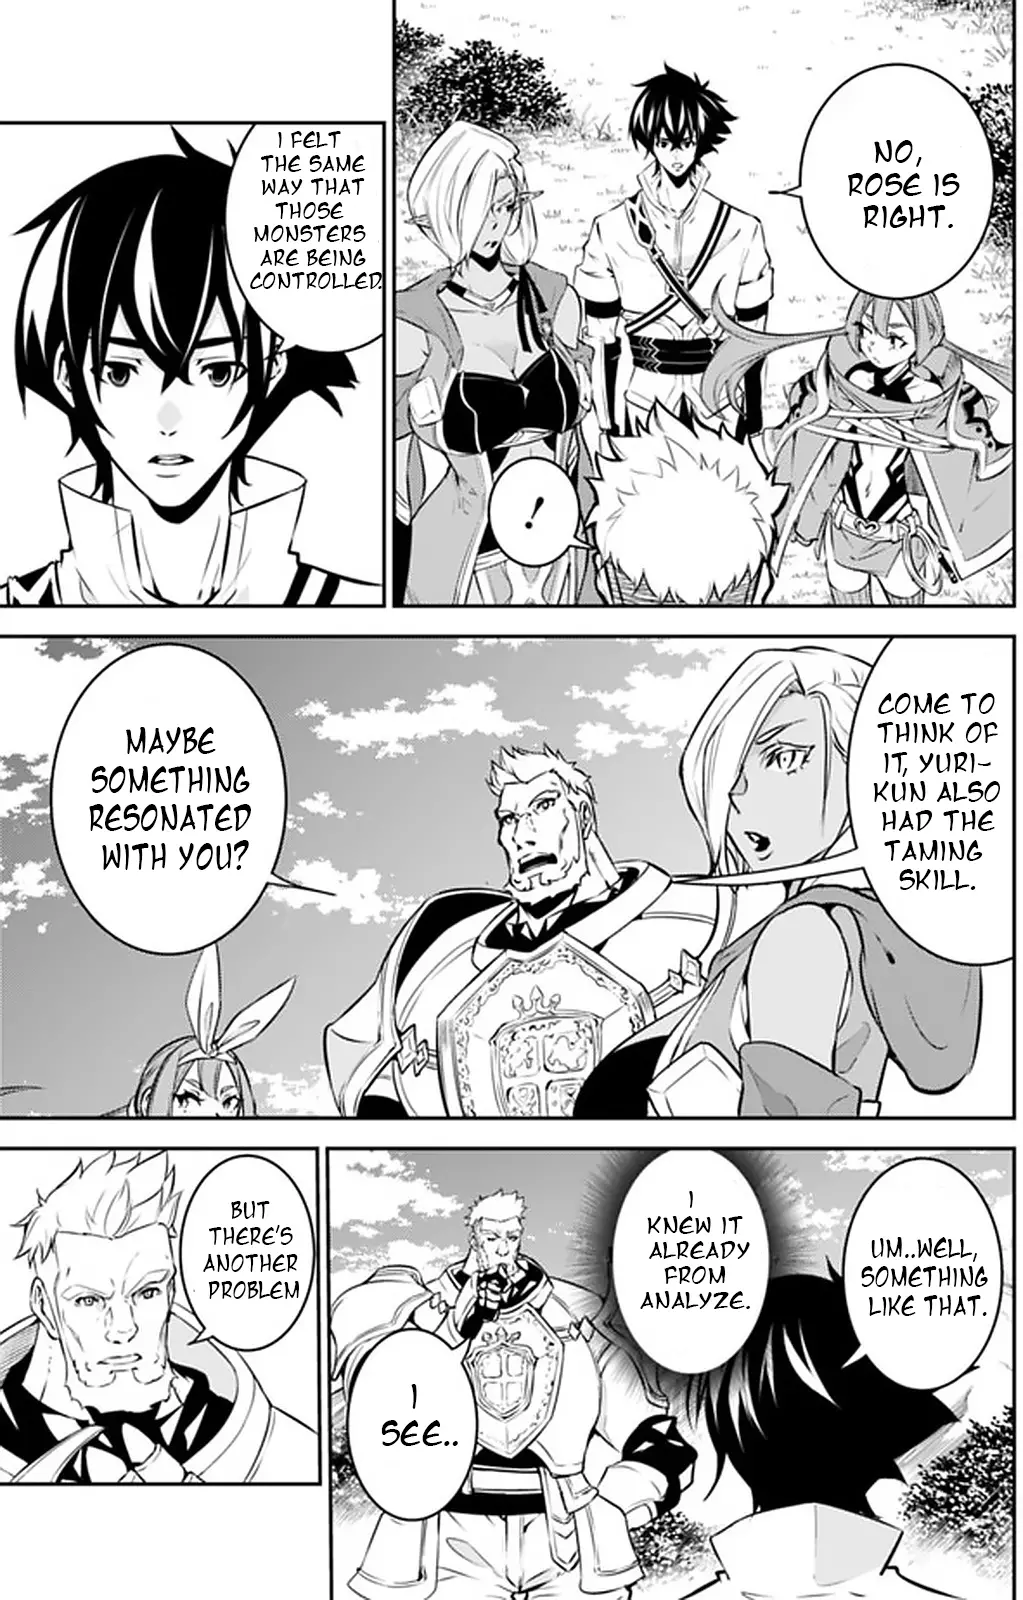 The Strongest Magical Swordsman Ever Reborn As An F-Rank Adventurer. - 33 page 7